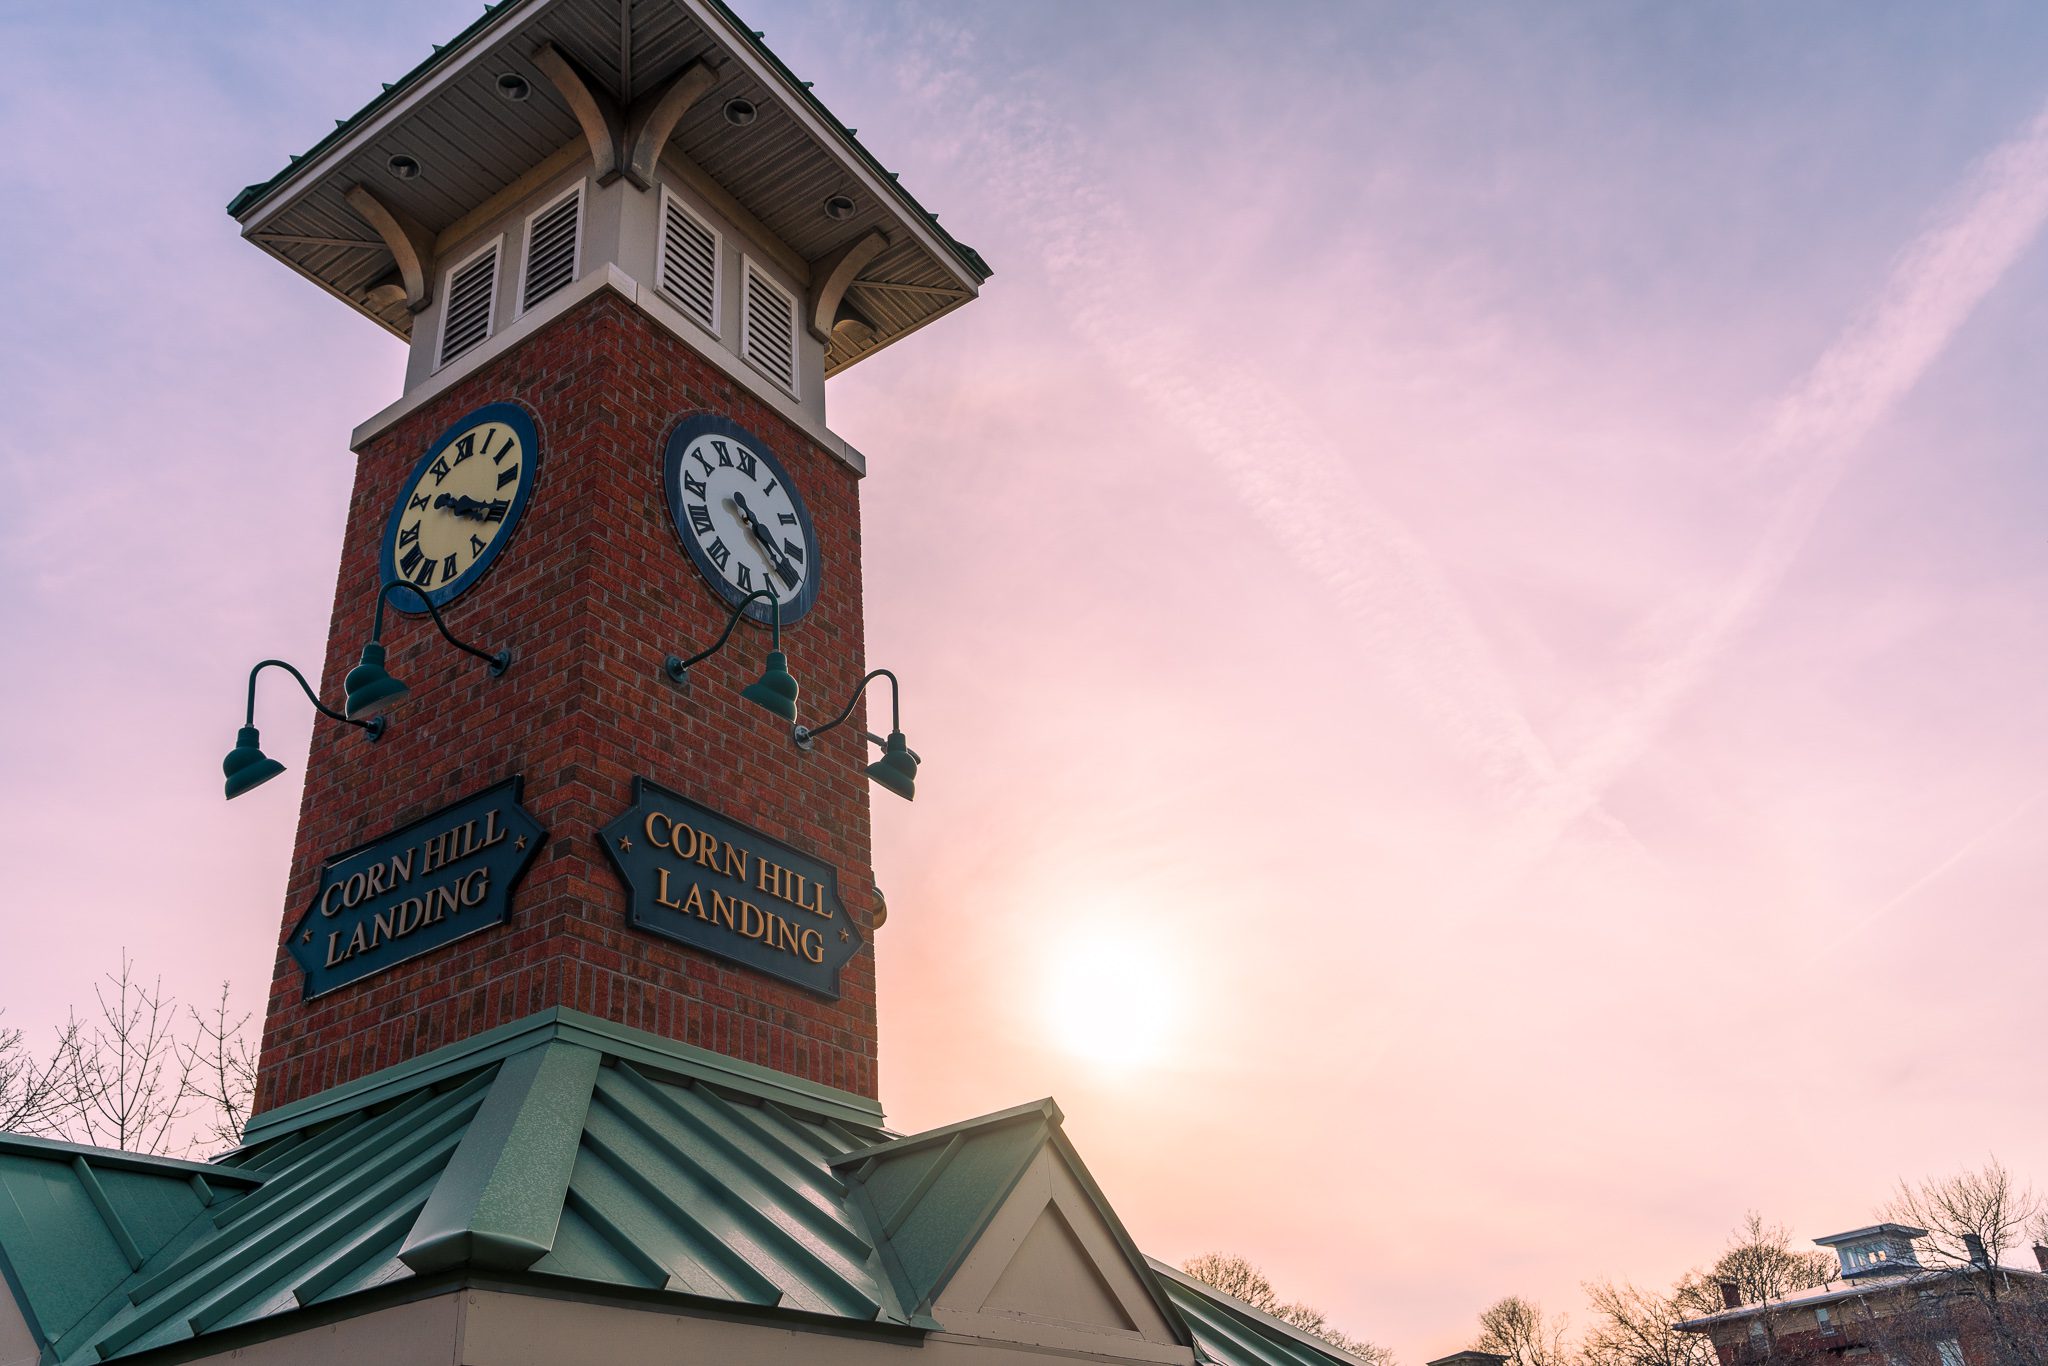 Clock Tower at Cornhill Landing Apartments. : Residential Property by Mark IV Enterprises: Rochester, NY